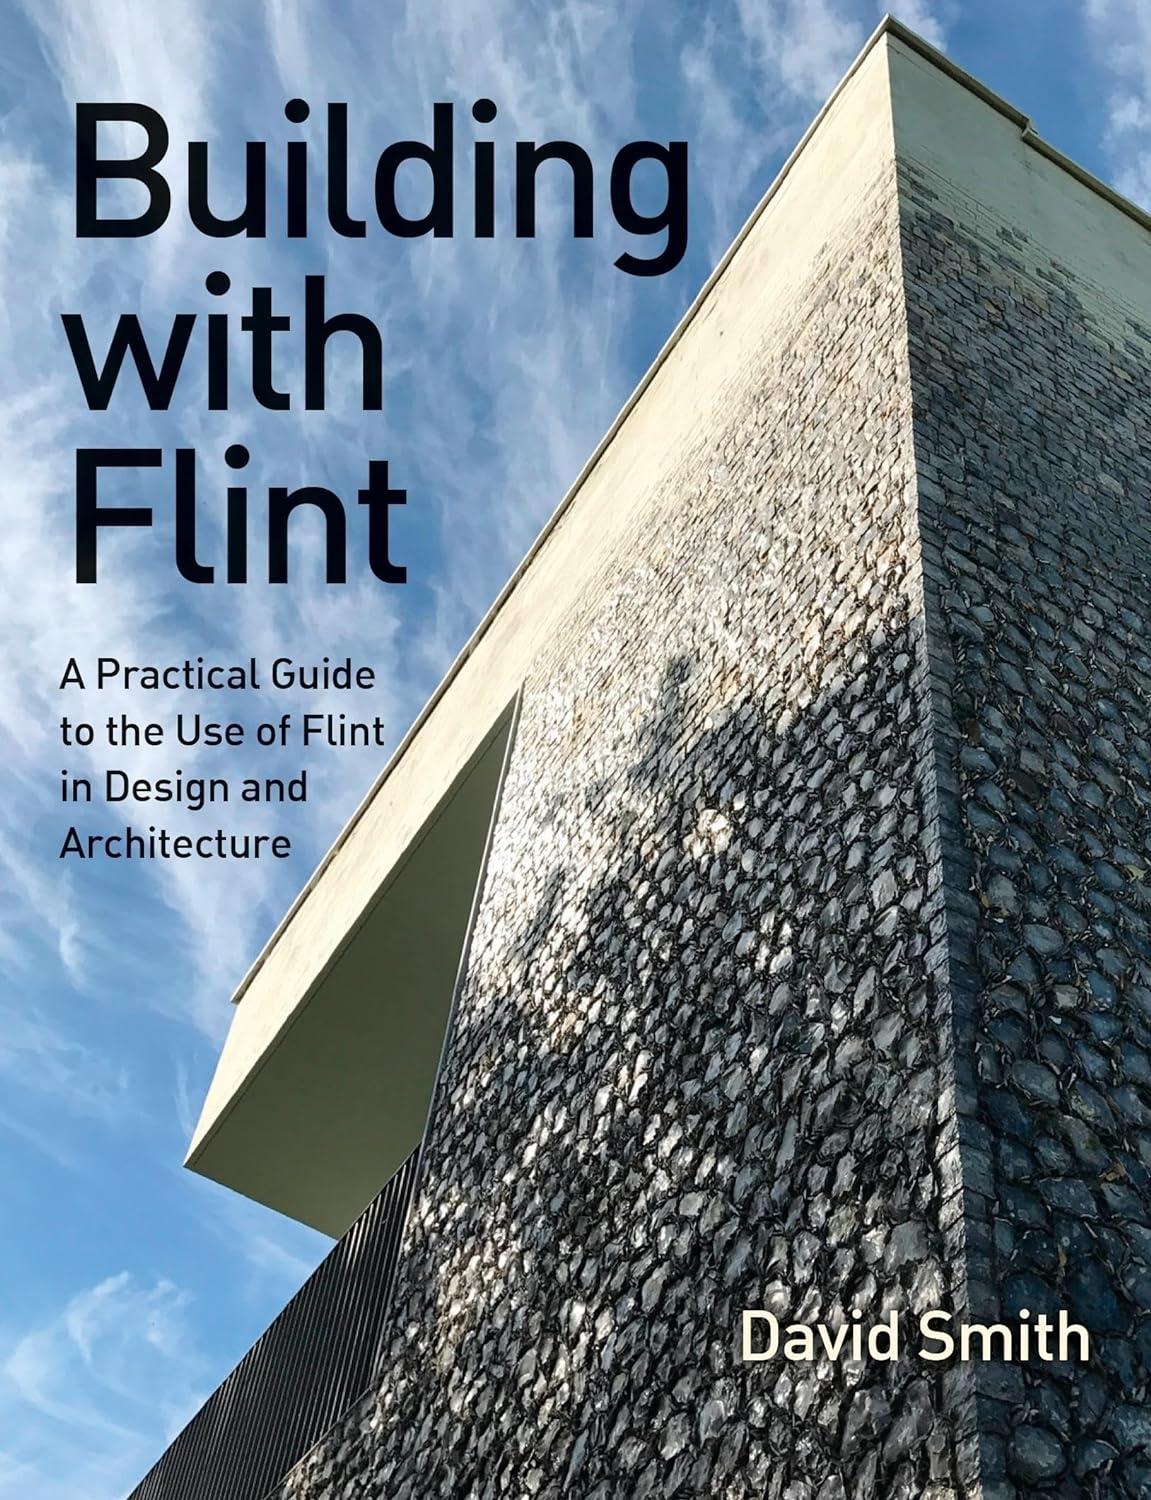 BUILDING WITH FLINT: " A PRACTICAL GUIDE TO THE USE OF FLINT IN DESIGN AND ARCHITECTURE"